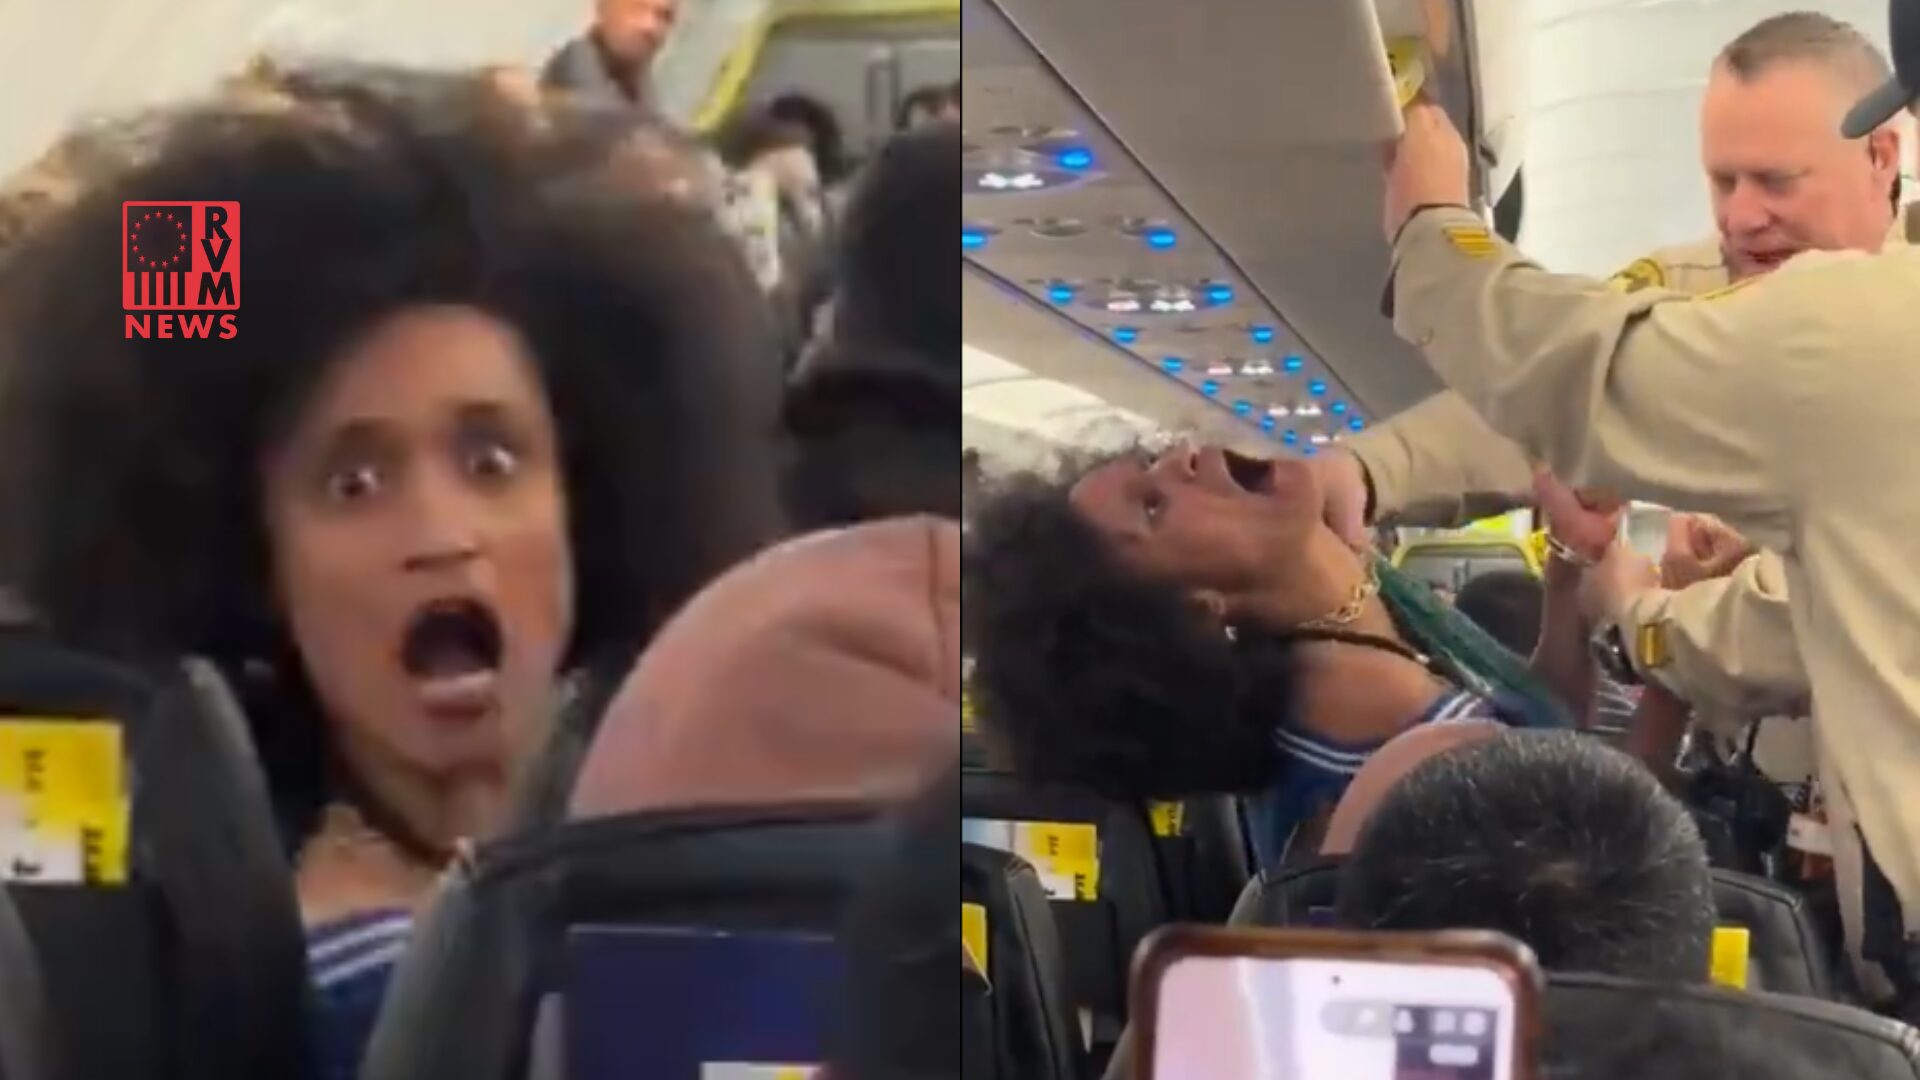 Lunatic Lady Loses It On A Plane, ‘I Can’t Breathe’ [VIDEO]